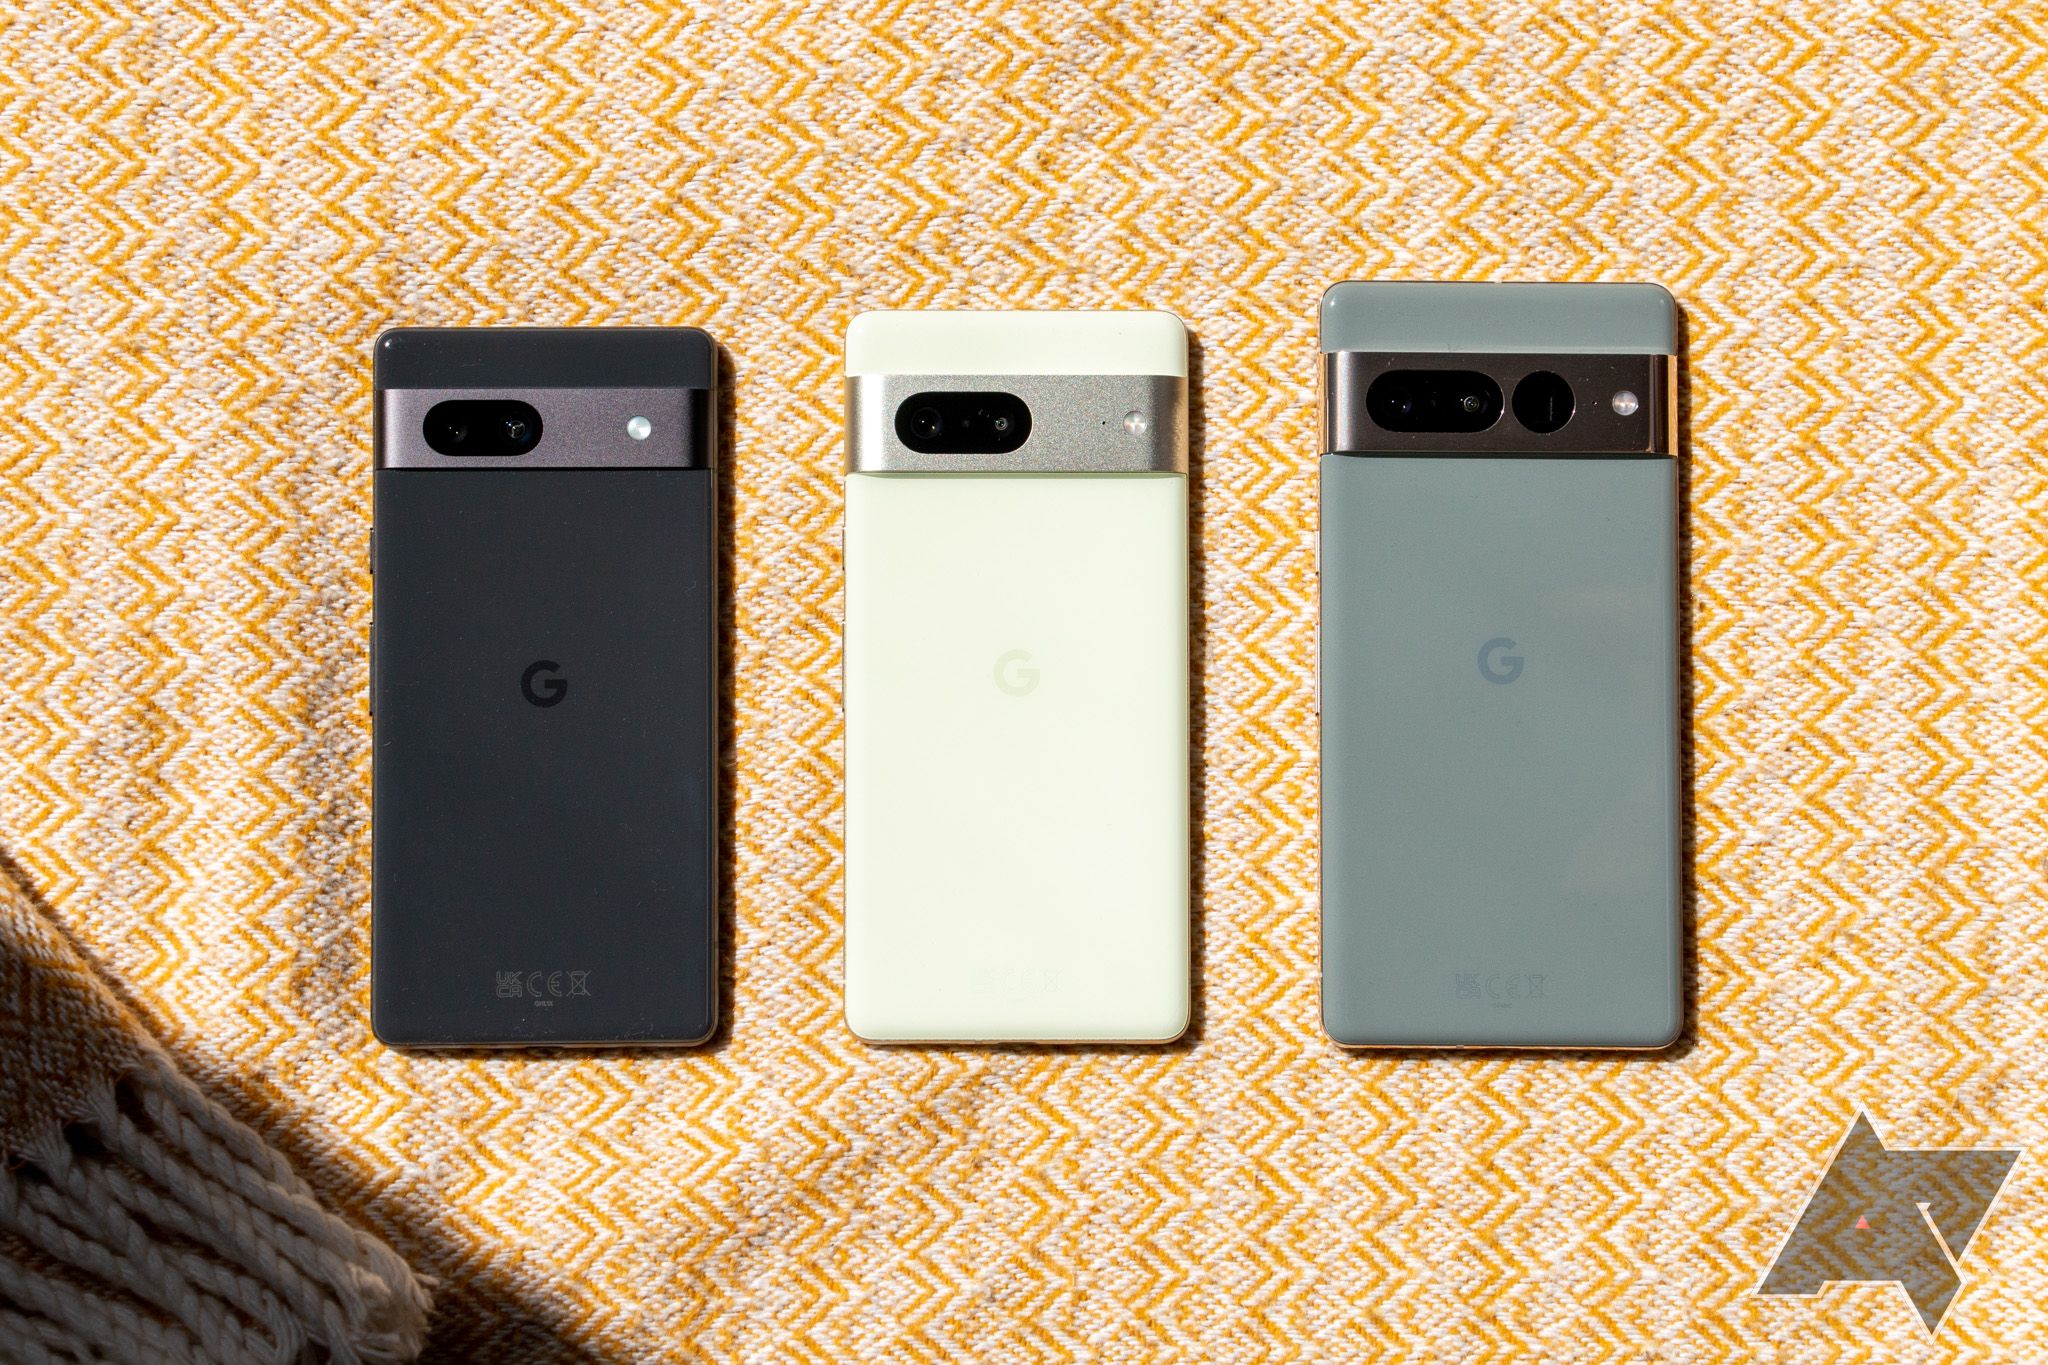 The Google Pixel 7a, Pixel 7, and Pixel 7 Pro lying neatly in a line face down on a patterned yellow surface